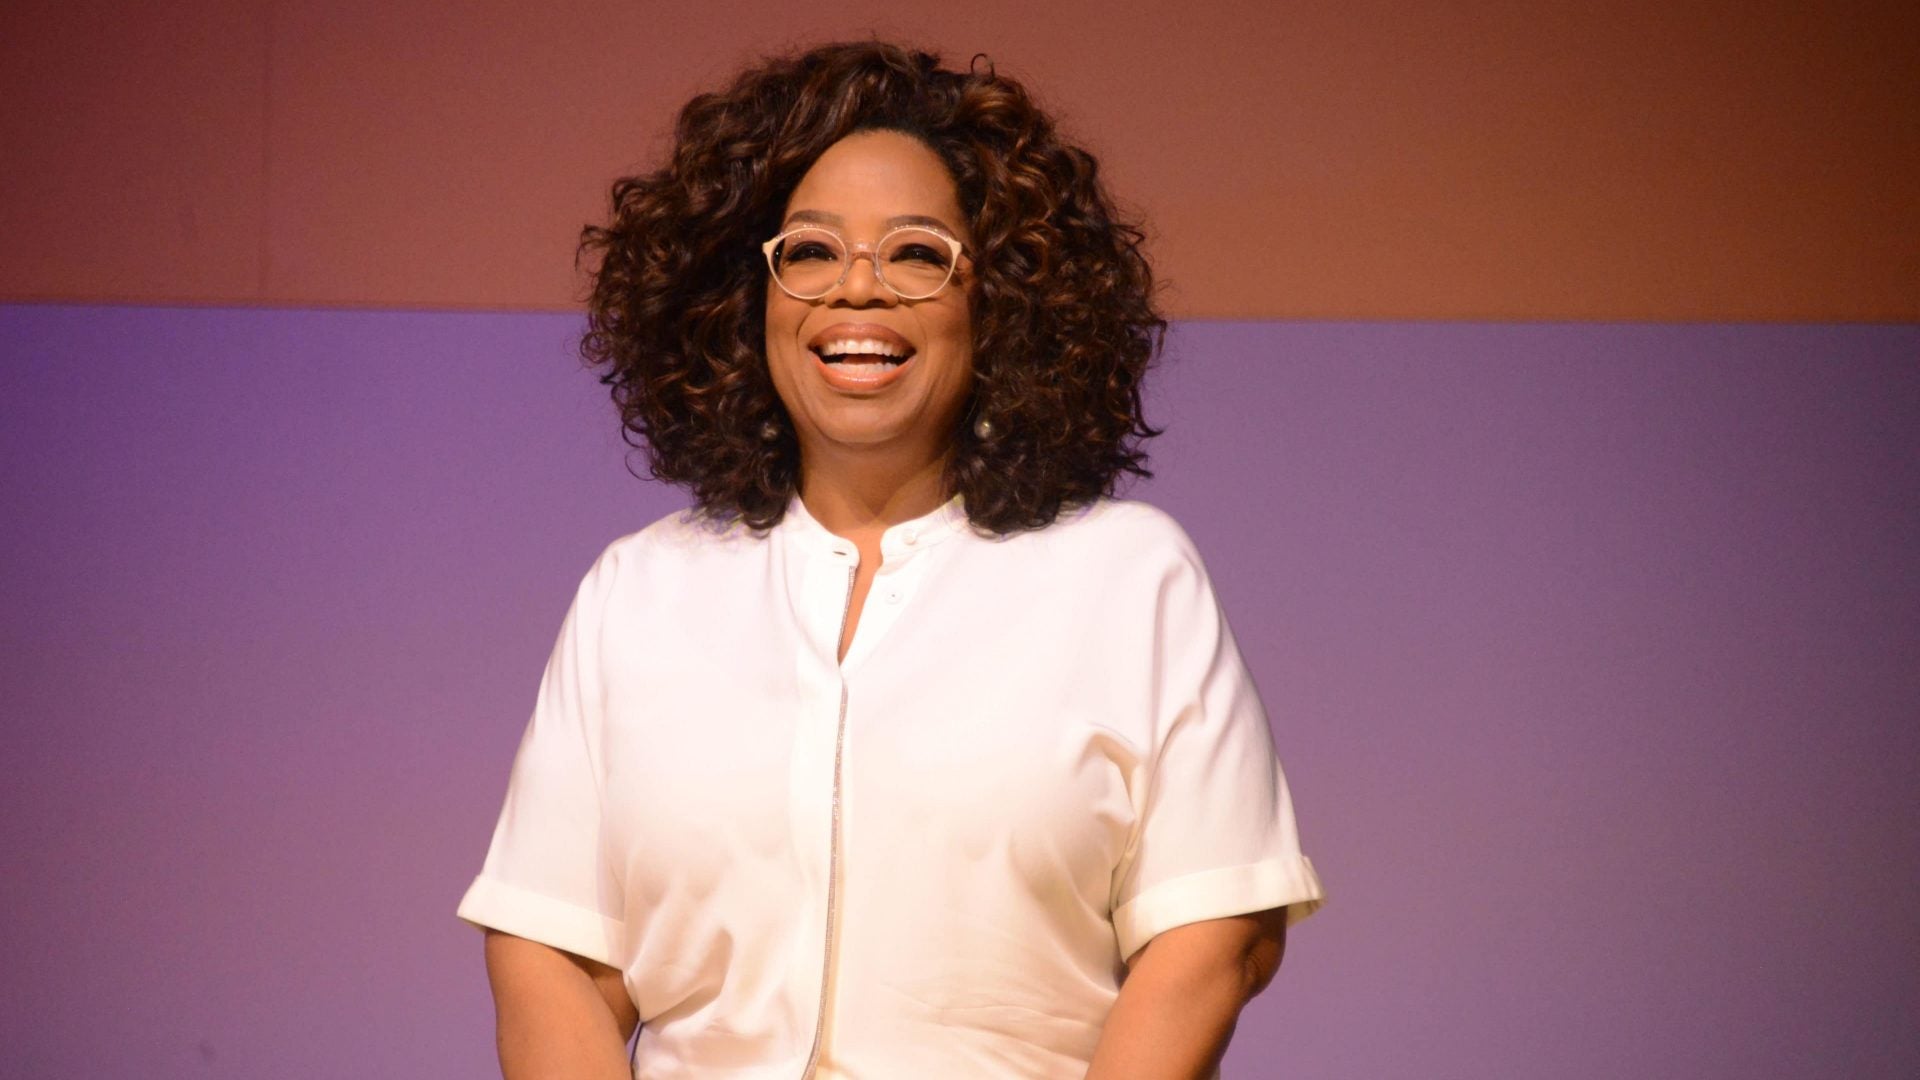 Oprah Winfrey Roasted This Student's Cracked Phone, Then Sent Him A New One